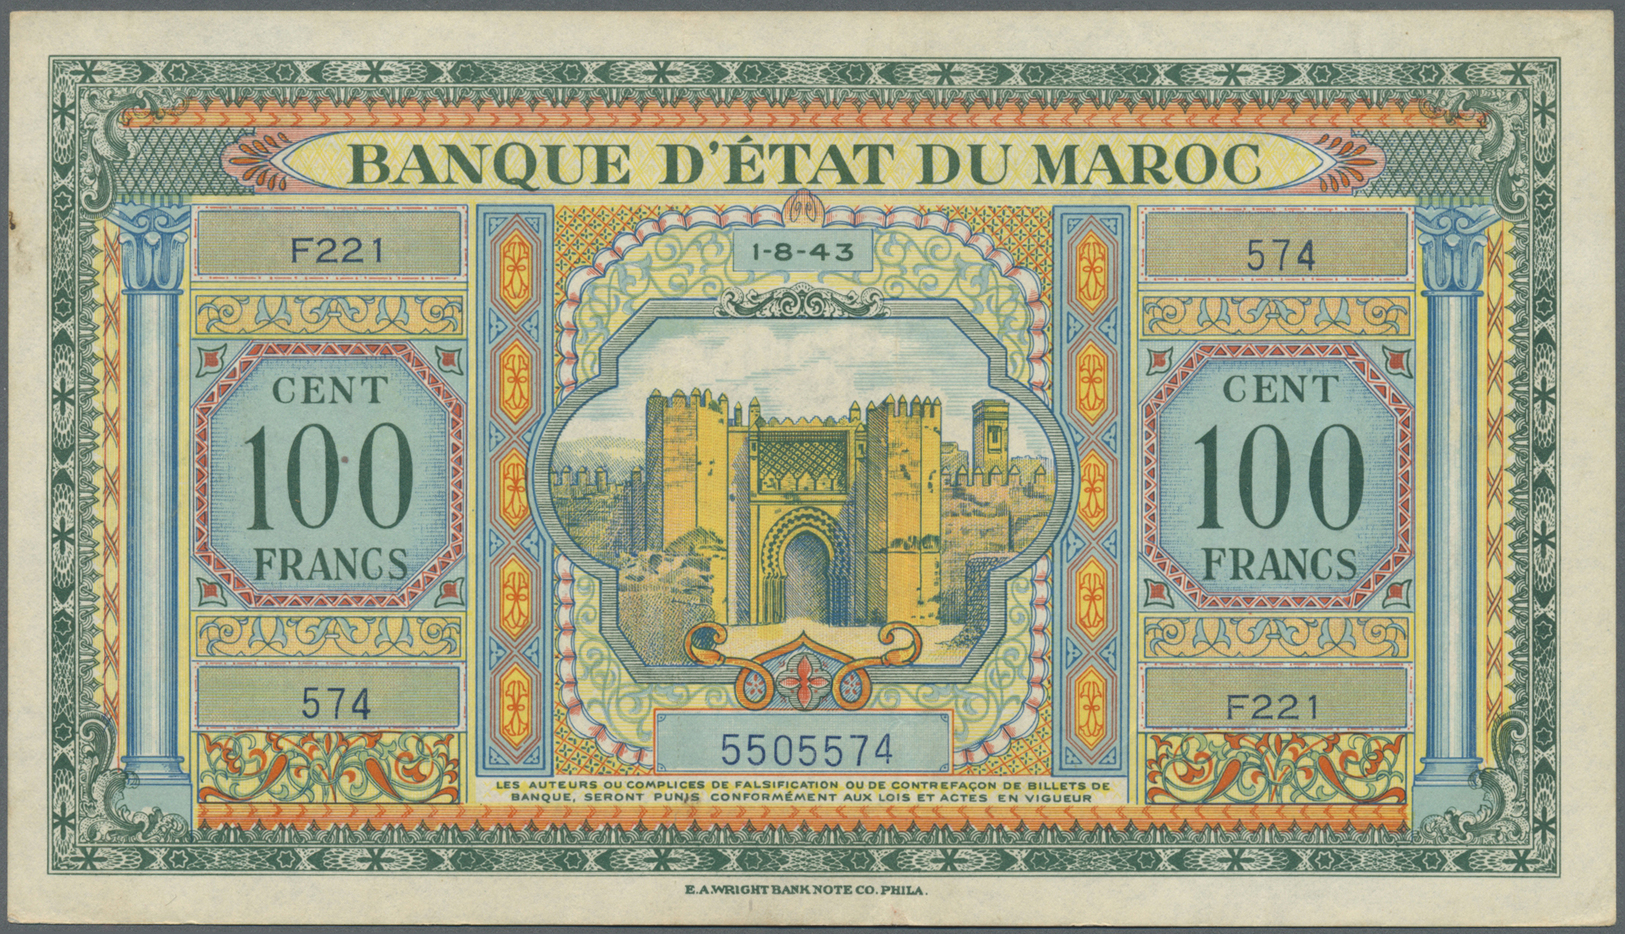 01750 Morocco / Marokko: 100 Francs 1943 P. 27 With Light Folds In Paper, No Holes Or Tears, Crisp And Bright Colors, Co - Morocco